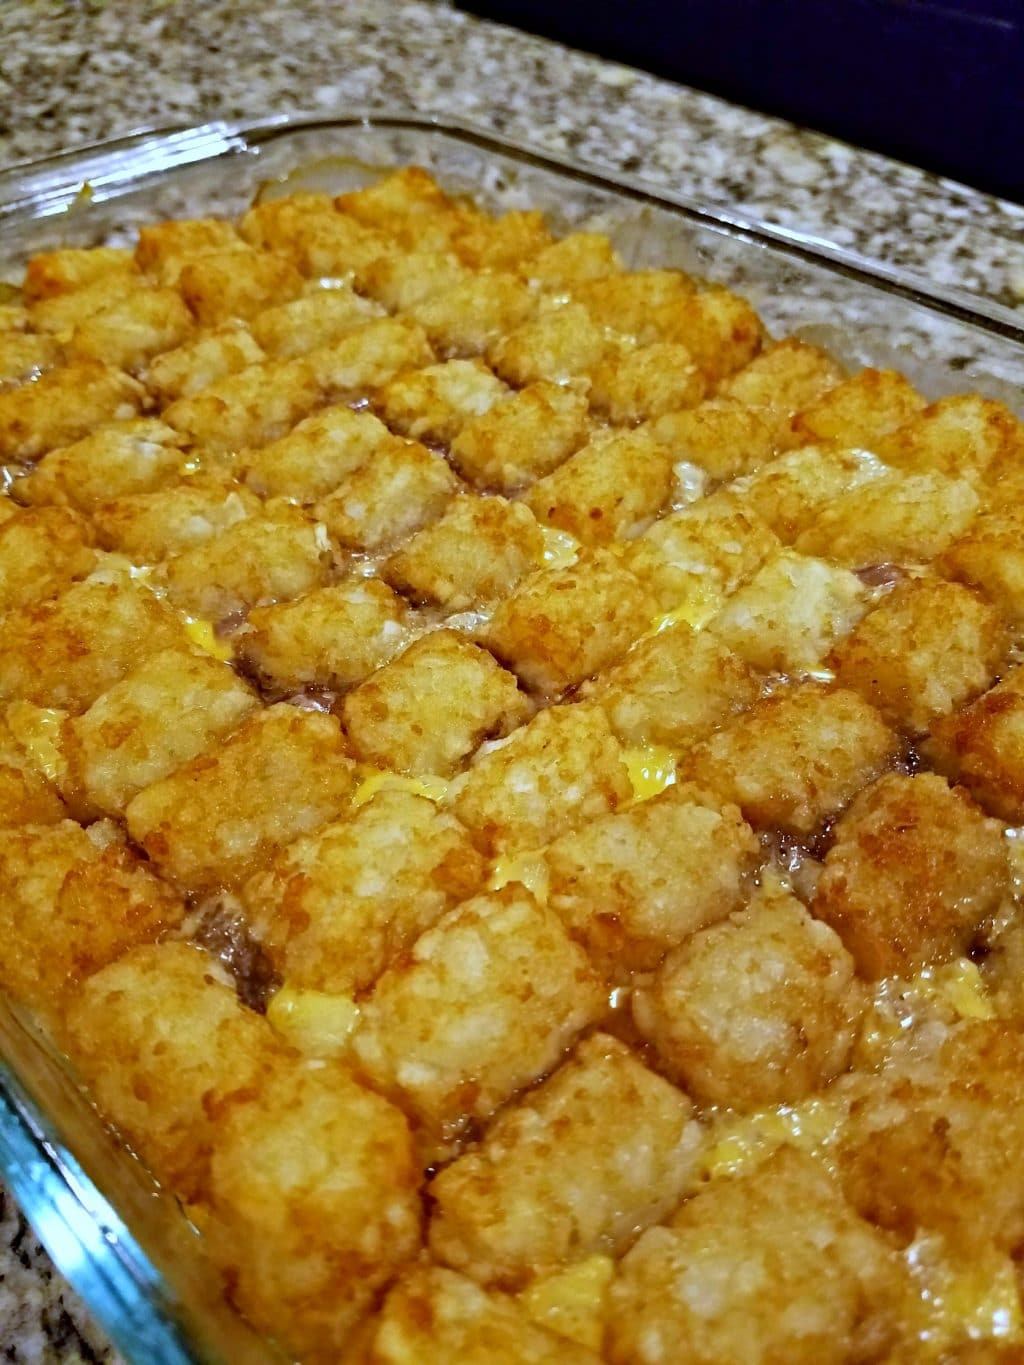 This tater tot casserole has a layer of ground beef topped with creamy mushroom soup, melted cheese, and crispy tater tots